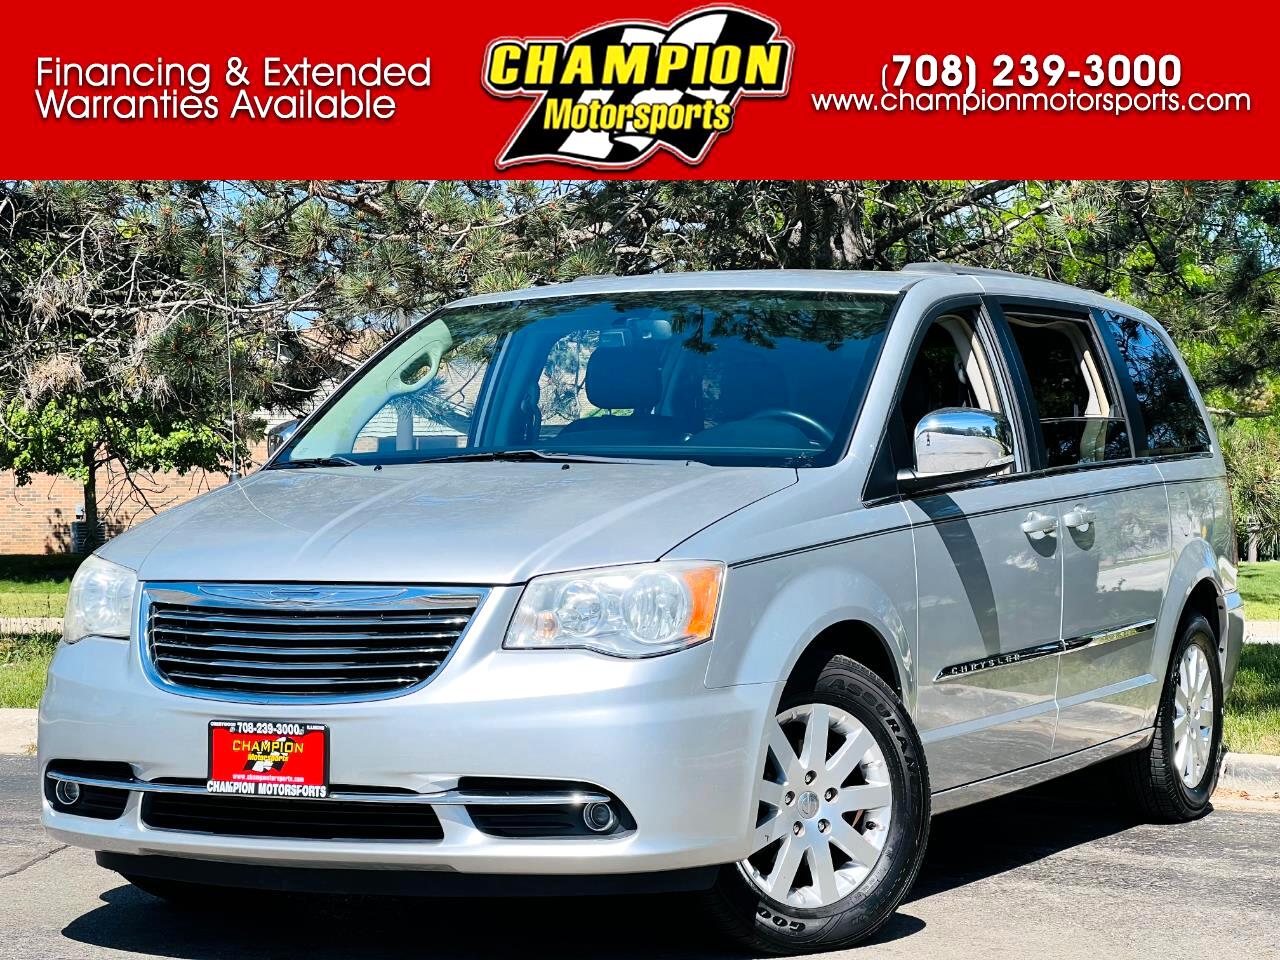 2011 Chrysler Town & Country 4dr Wgn Touring-L